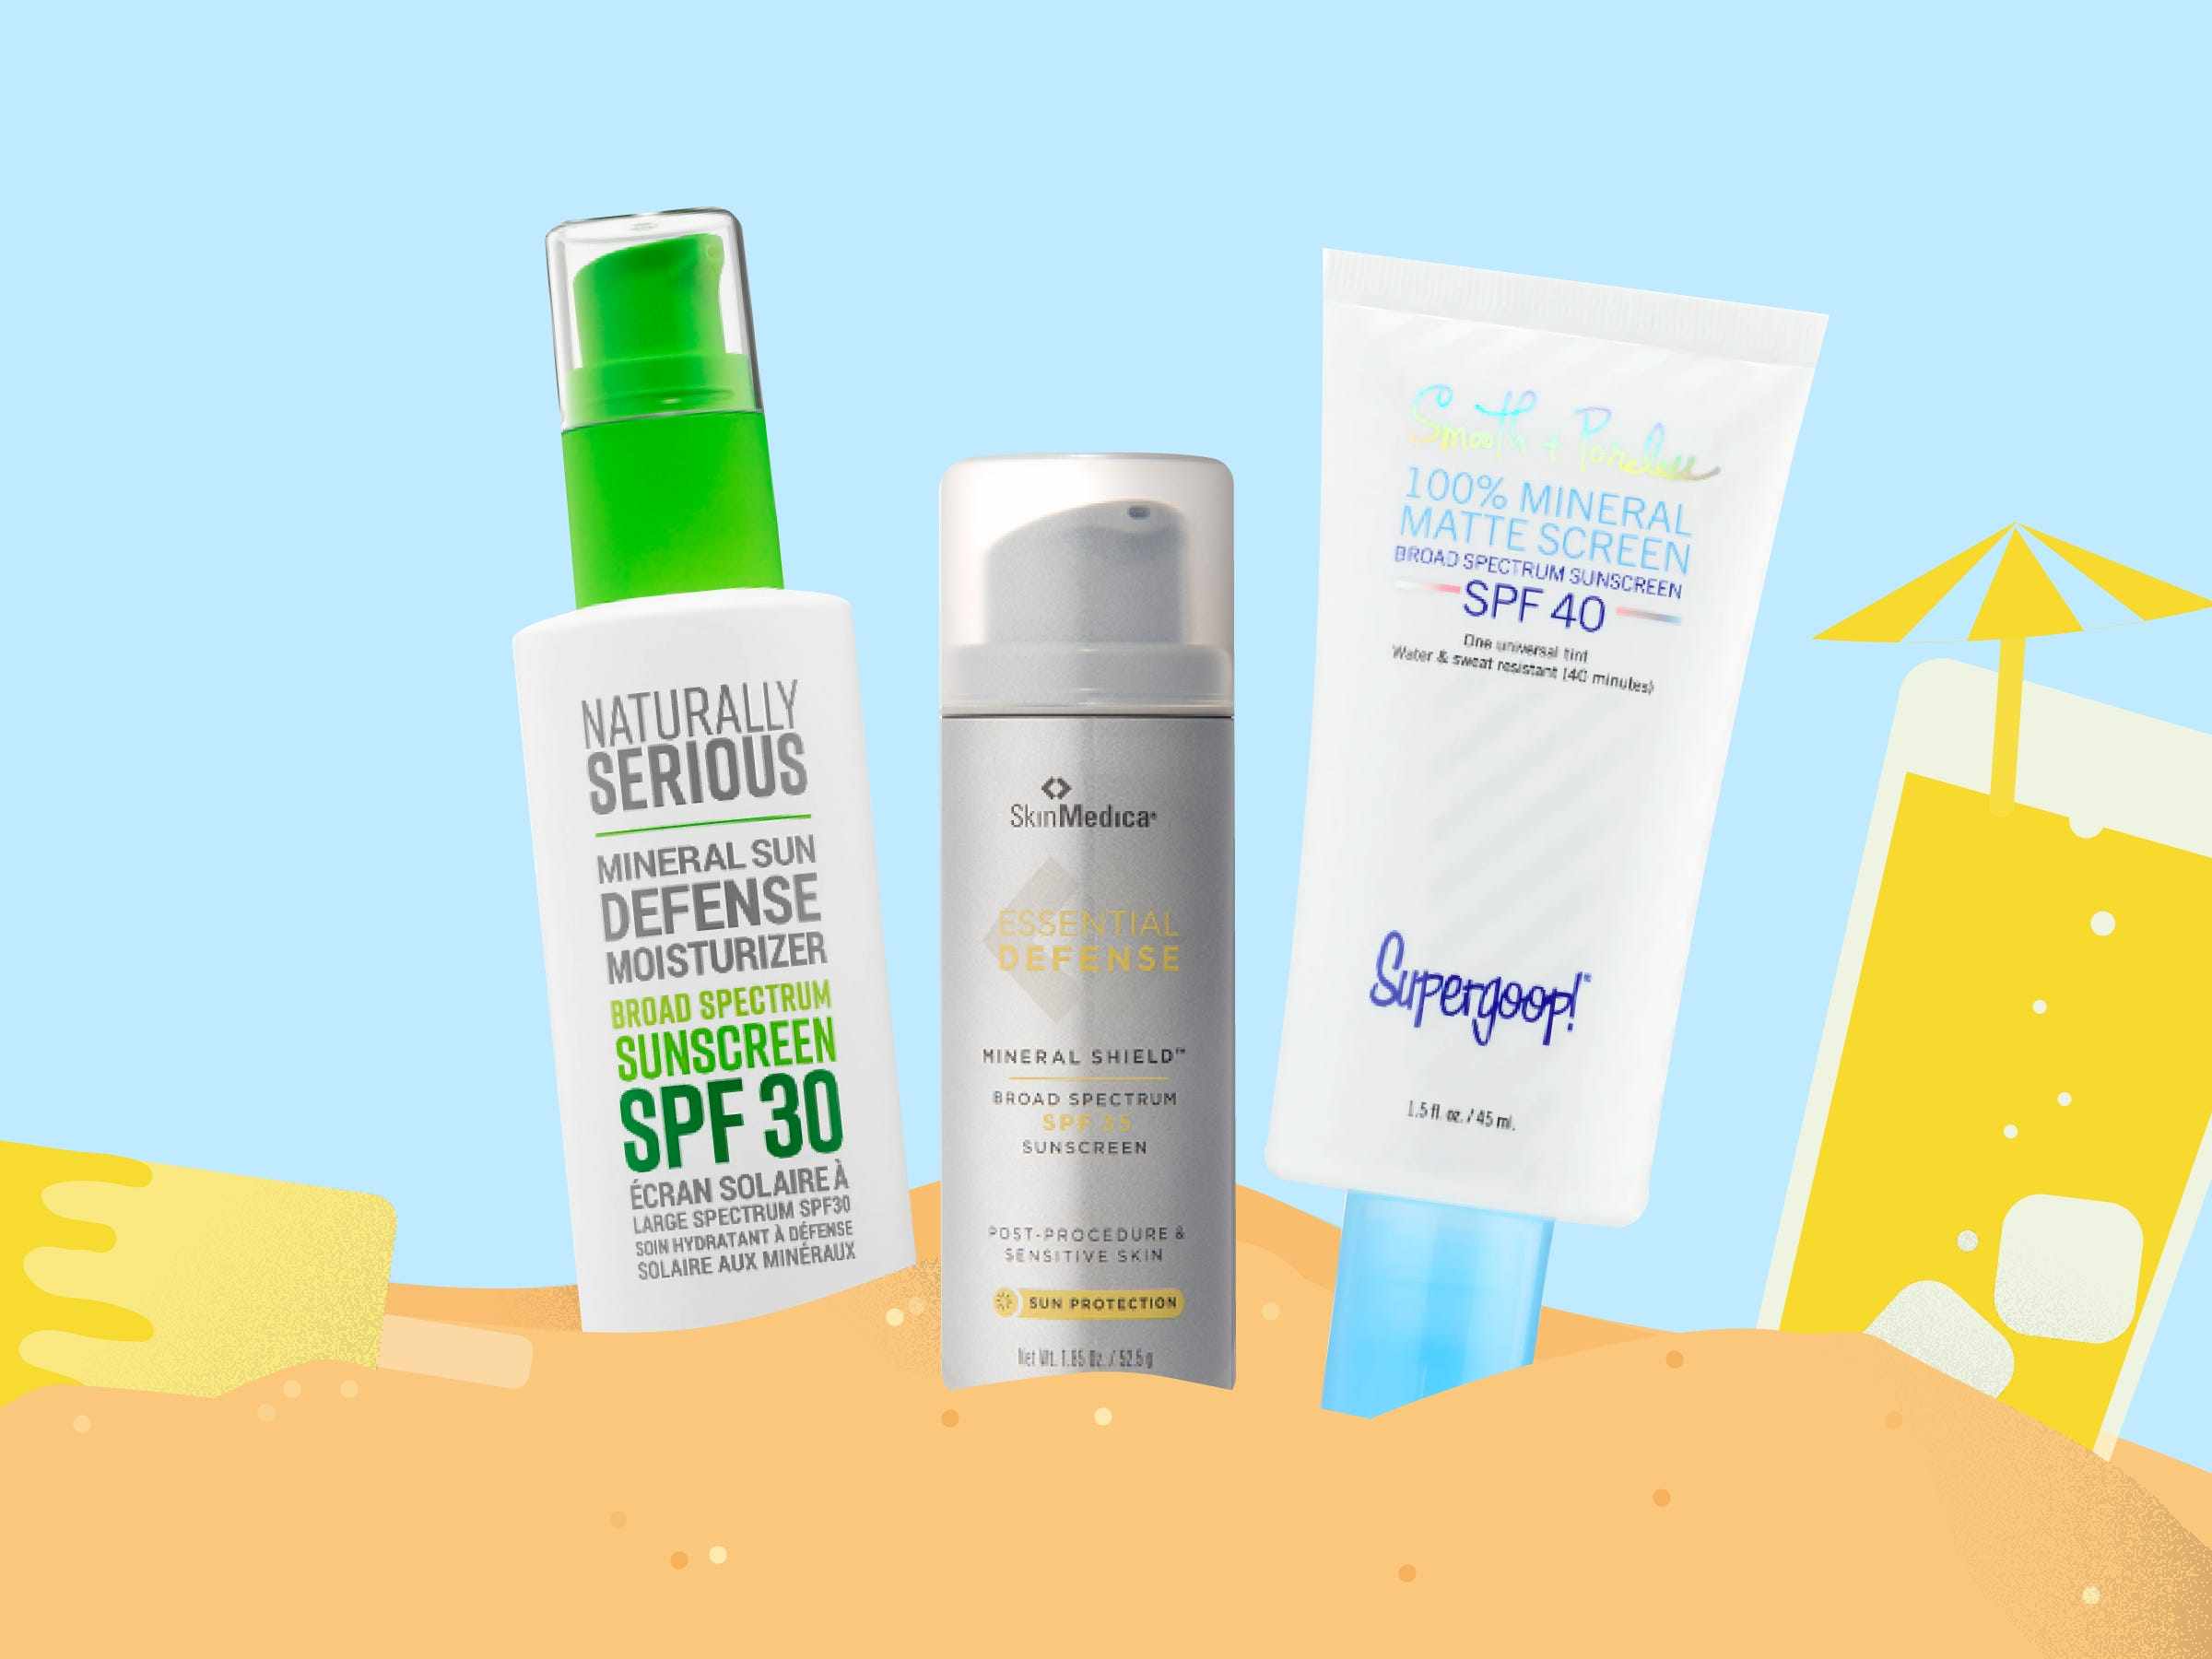 dermatologist mineral sunscreen recommendations budget